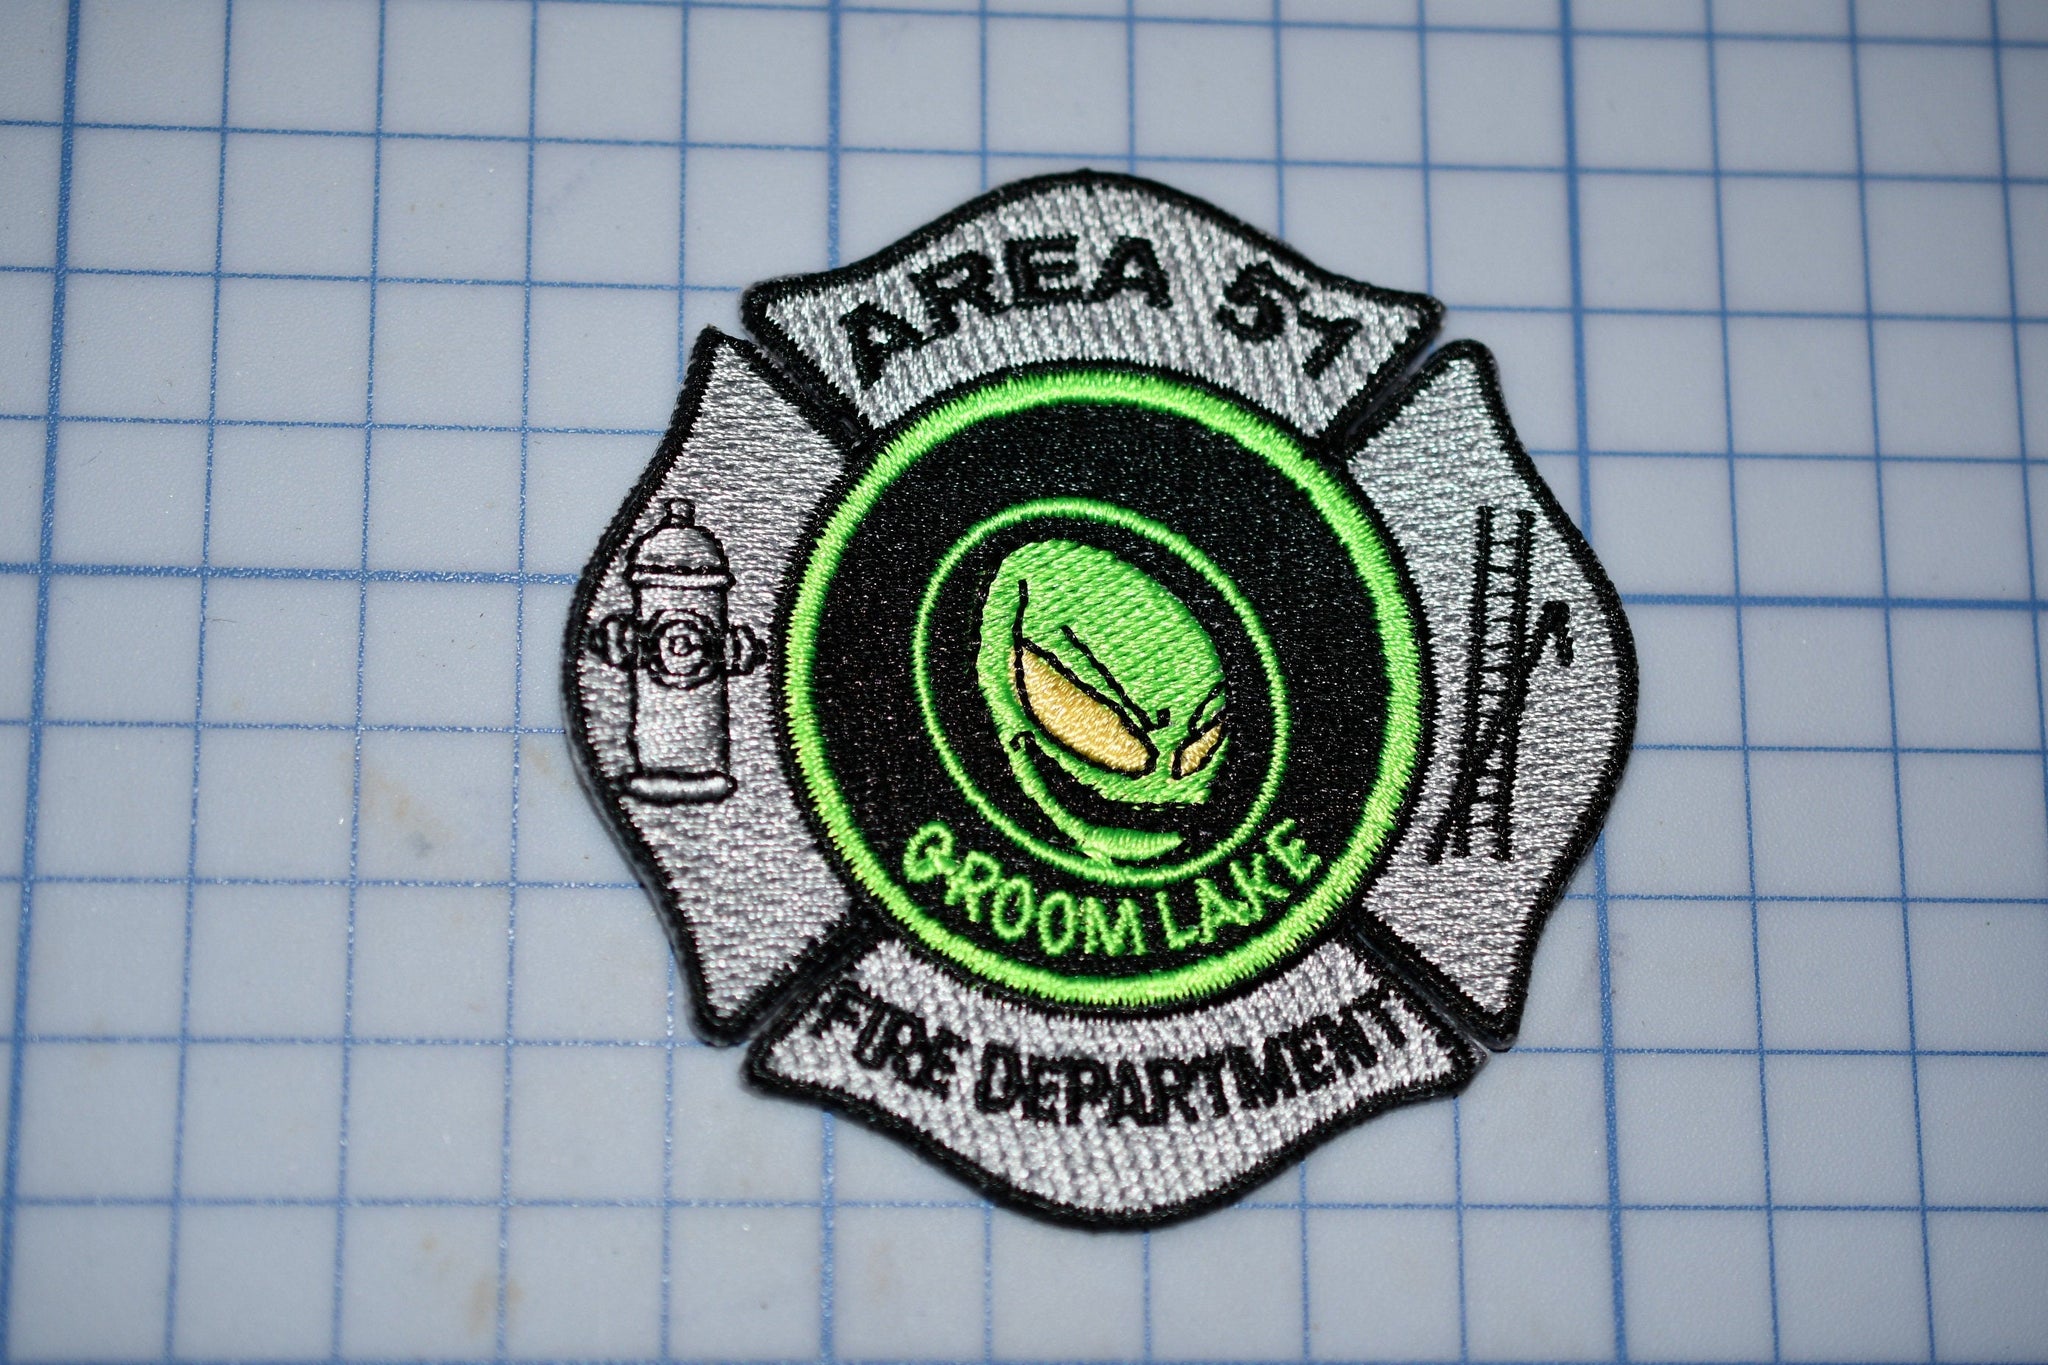 Area 51 Groom Lake Fire Department Patch (B19)